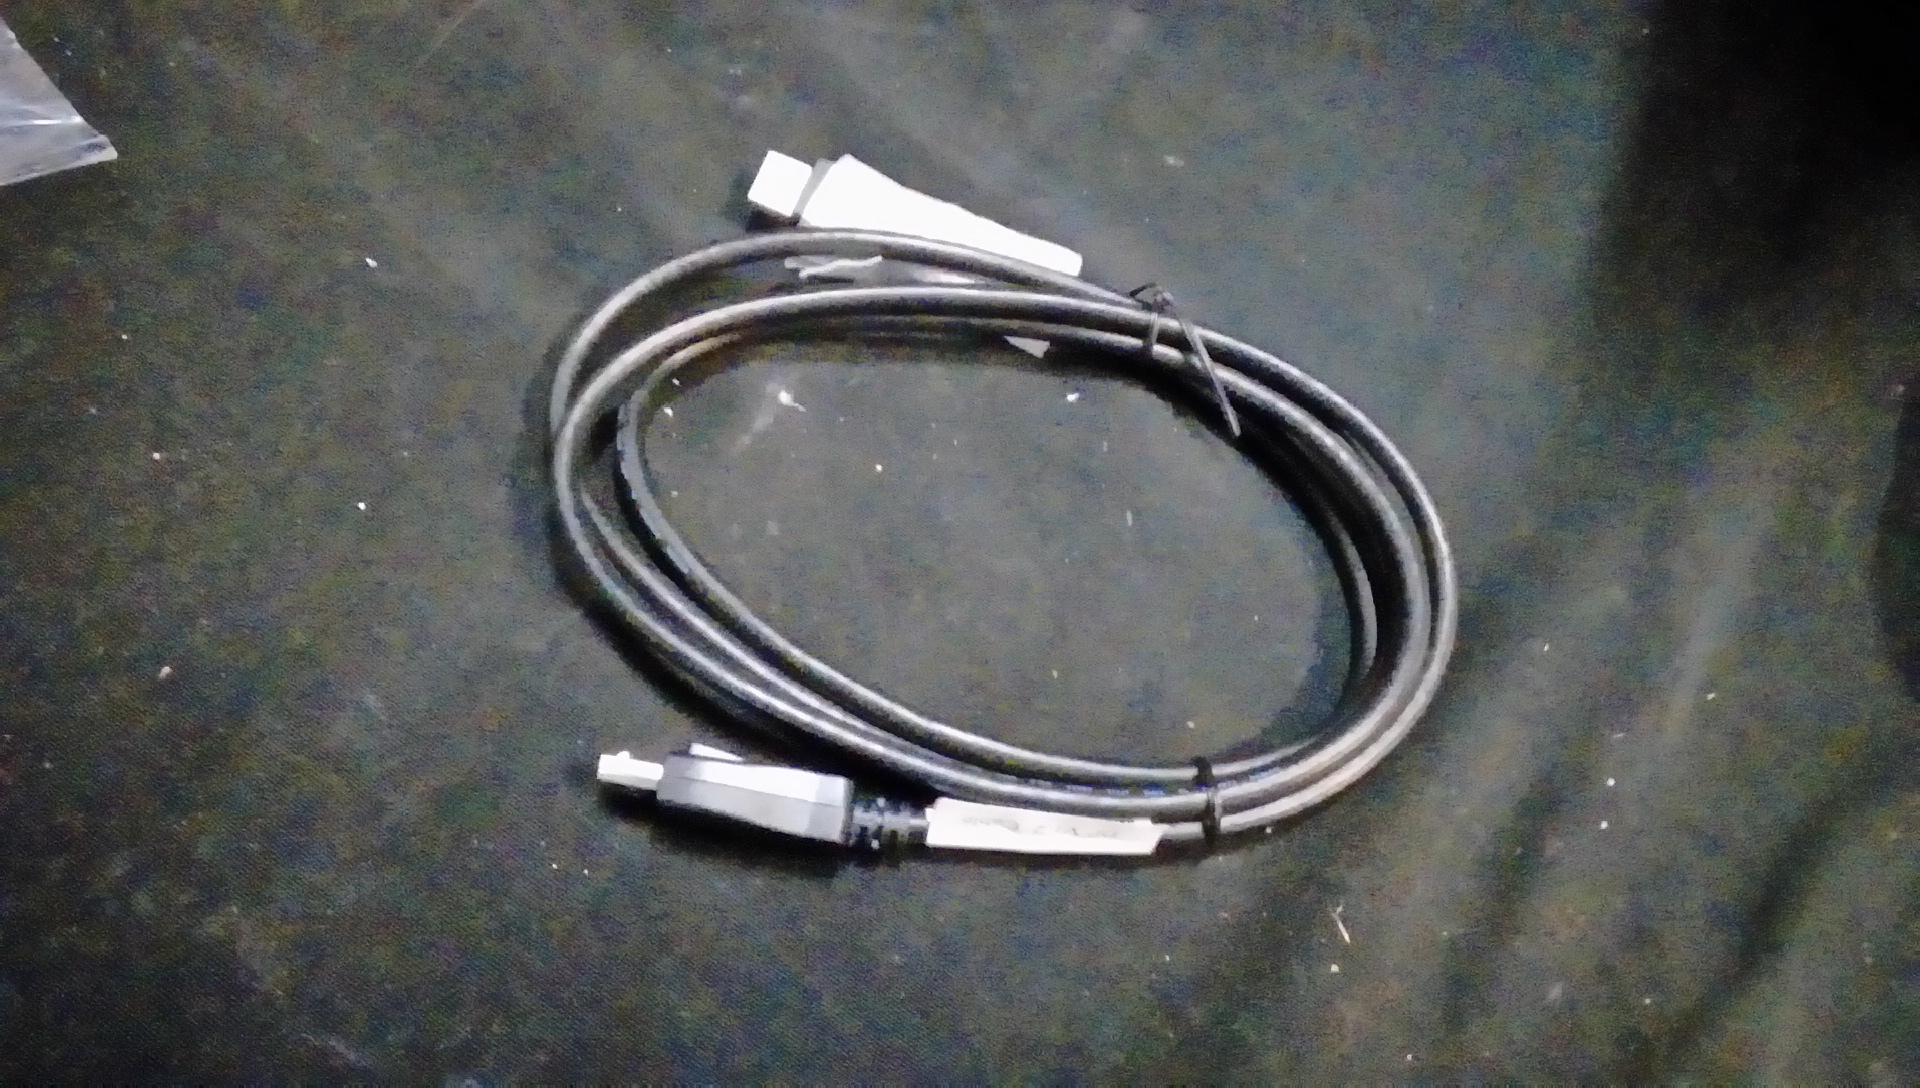 CABLE